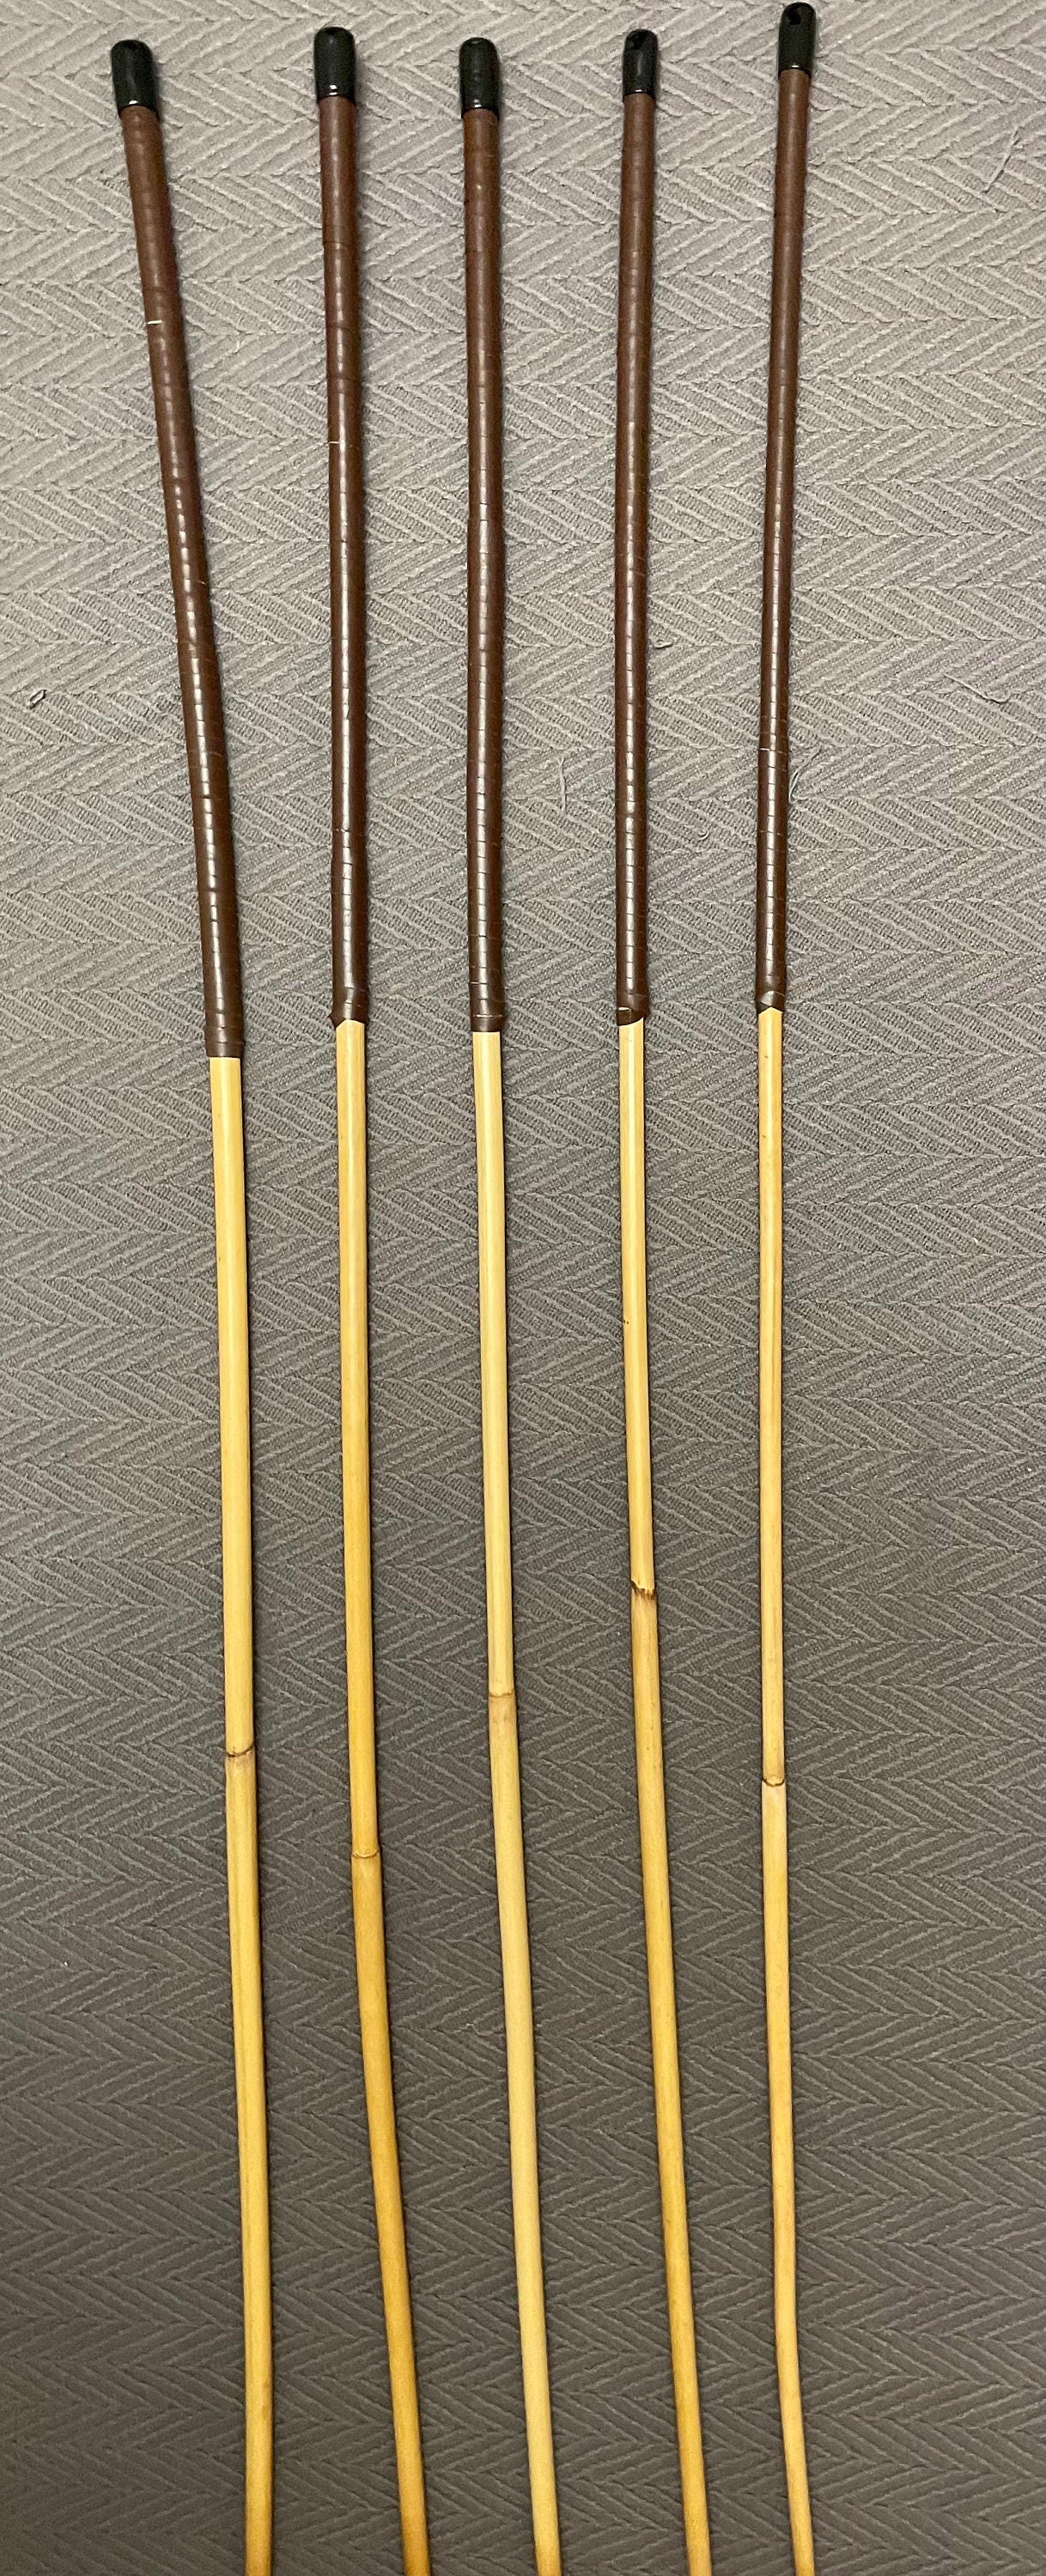 Set of 5 Long Whippy Dragon Canes with Brandy Kangaroo Leather Handles